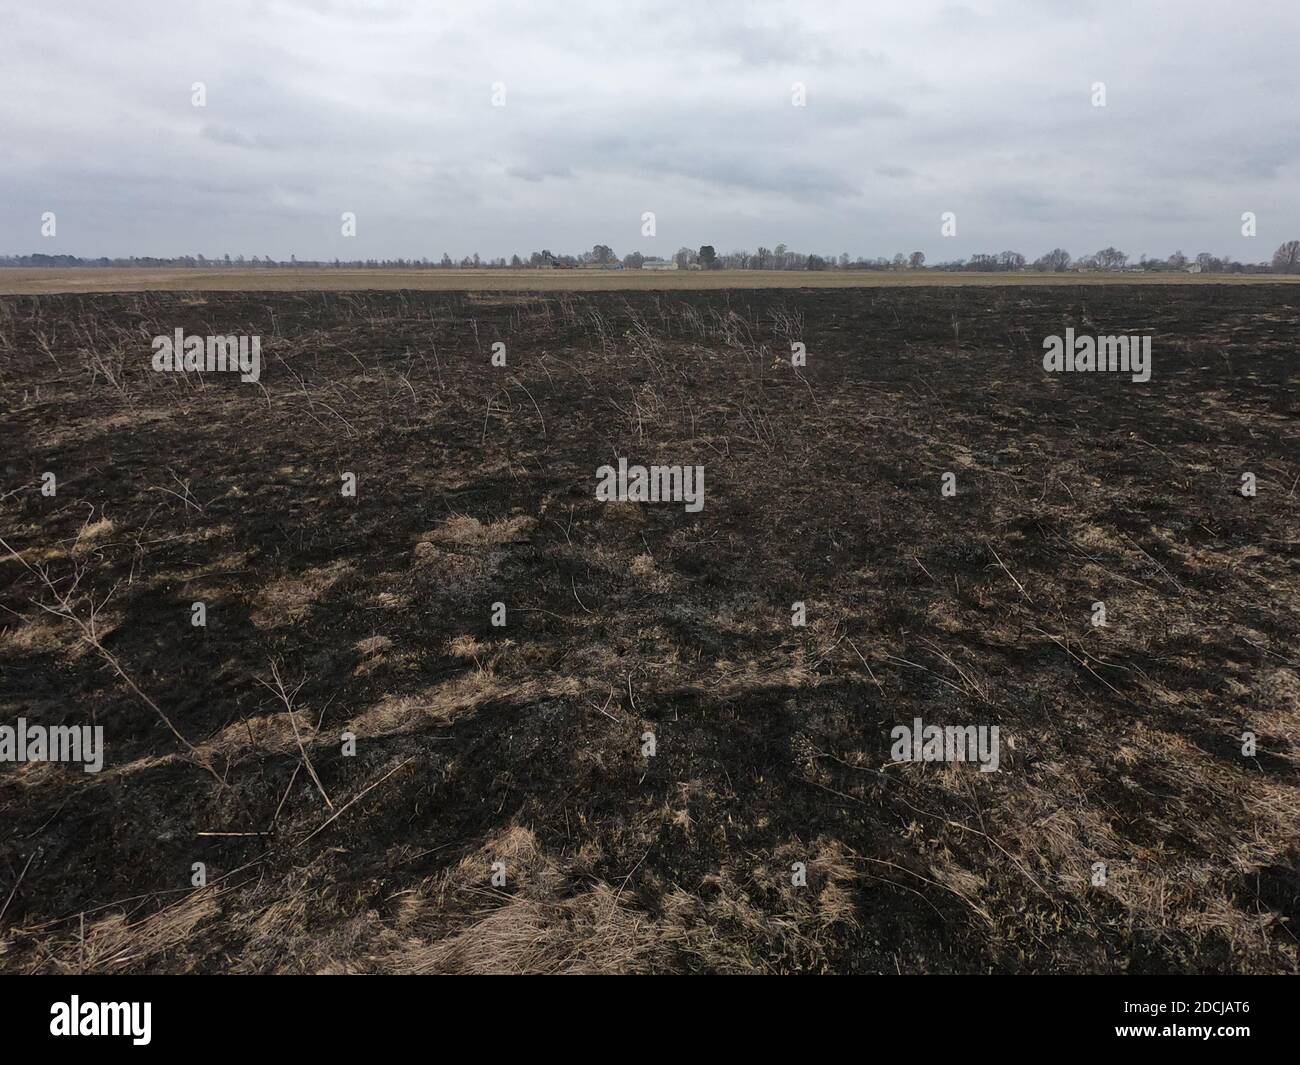 Burnt field. Place of environmental disaster. Moody landscape. Stock Photo